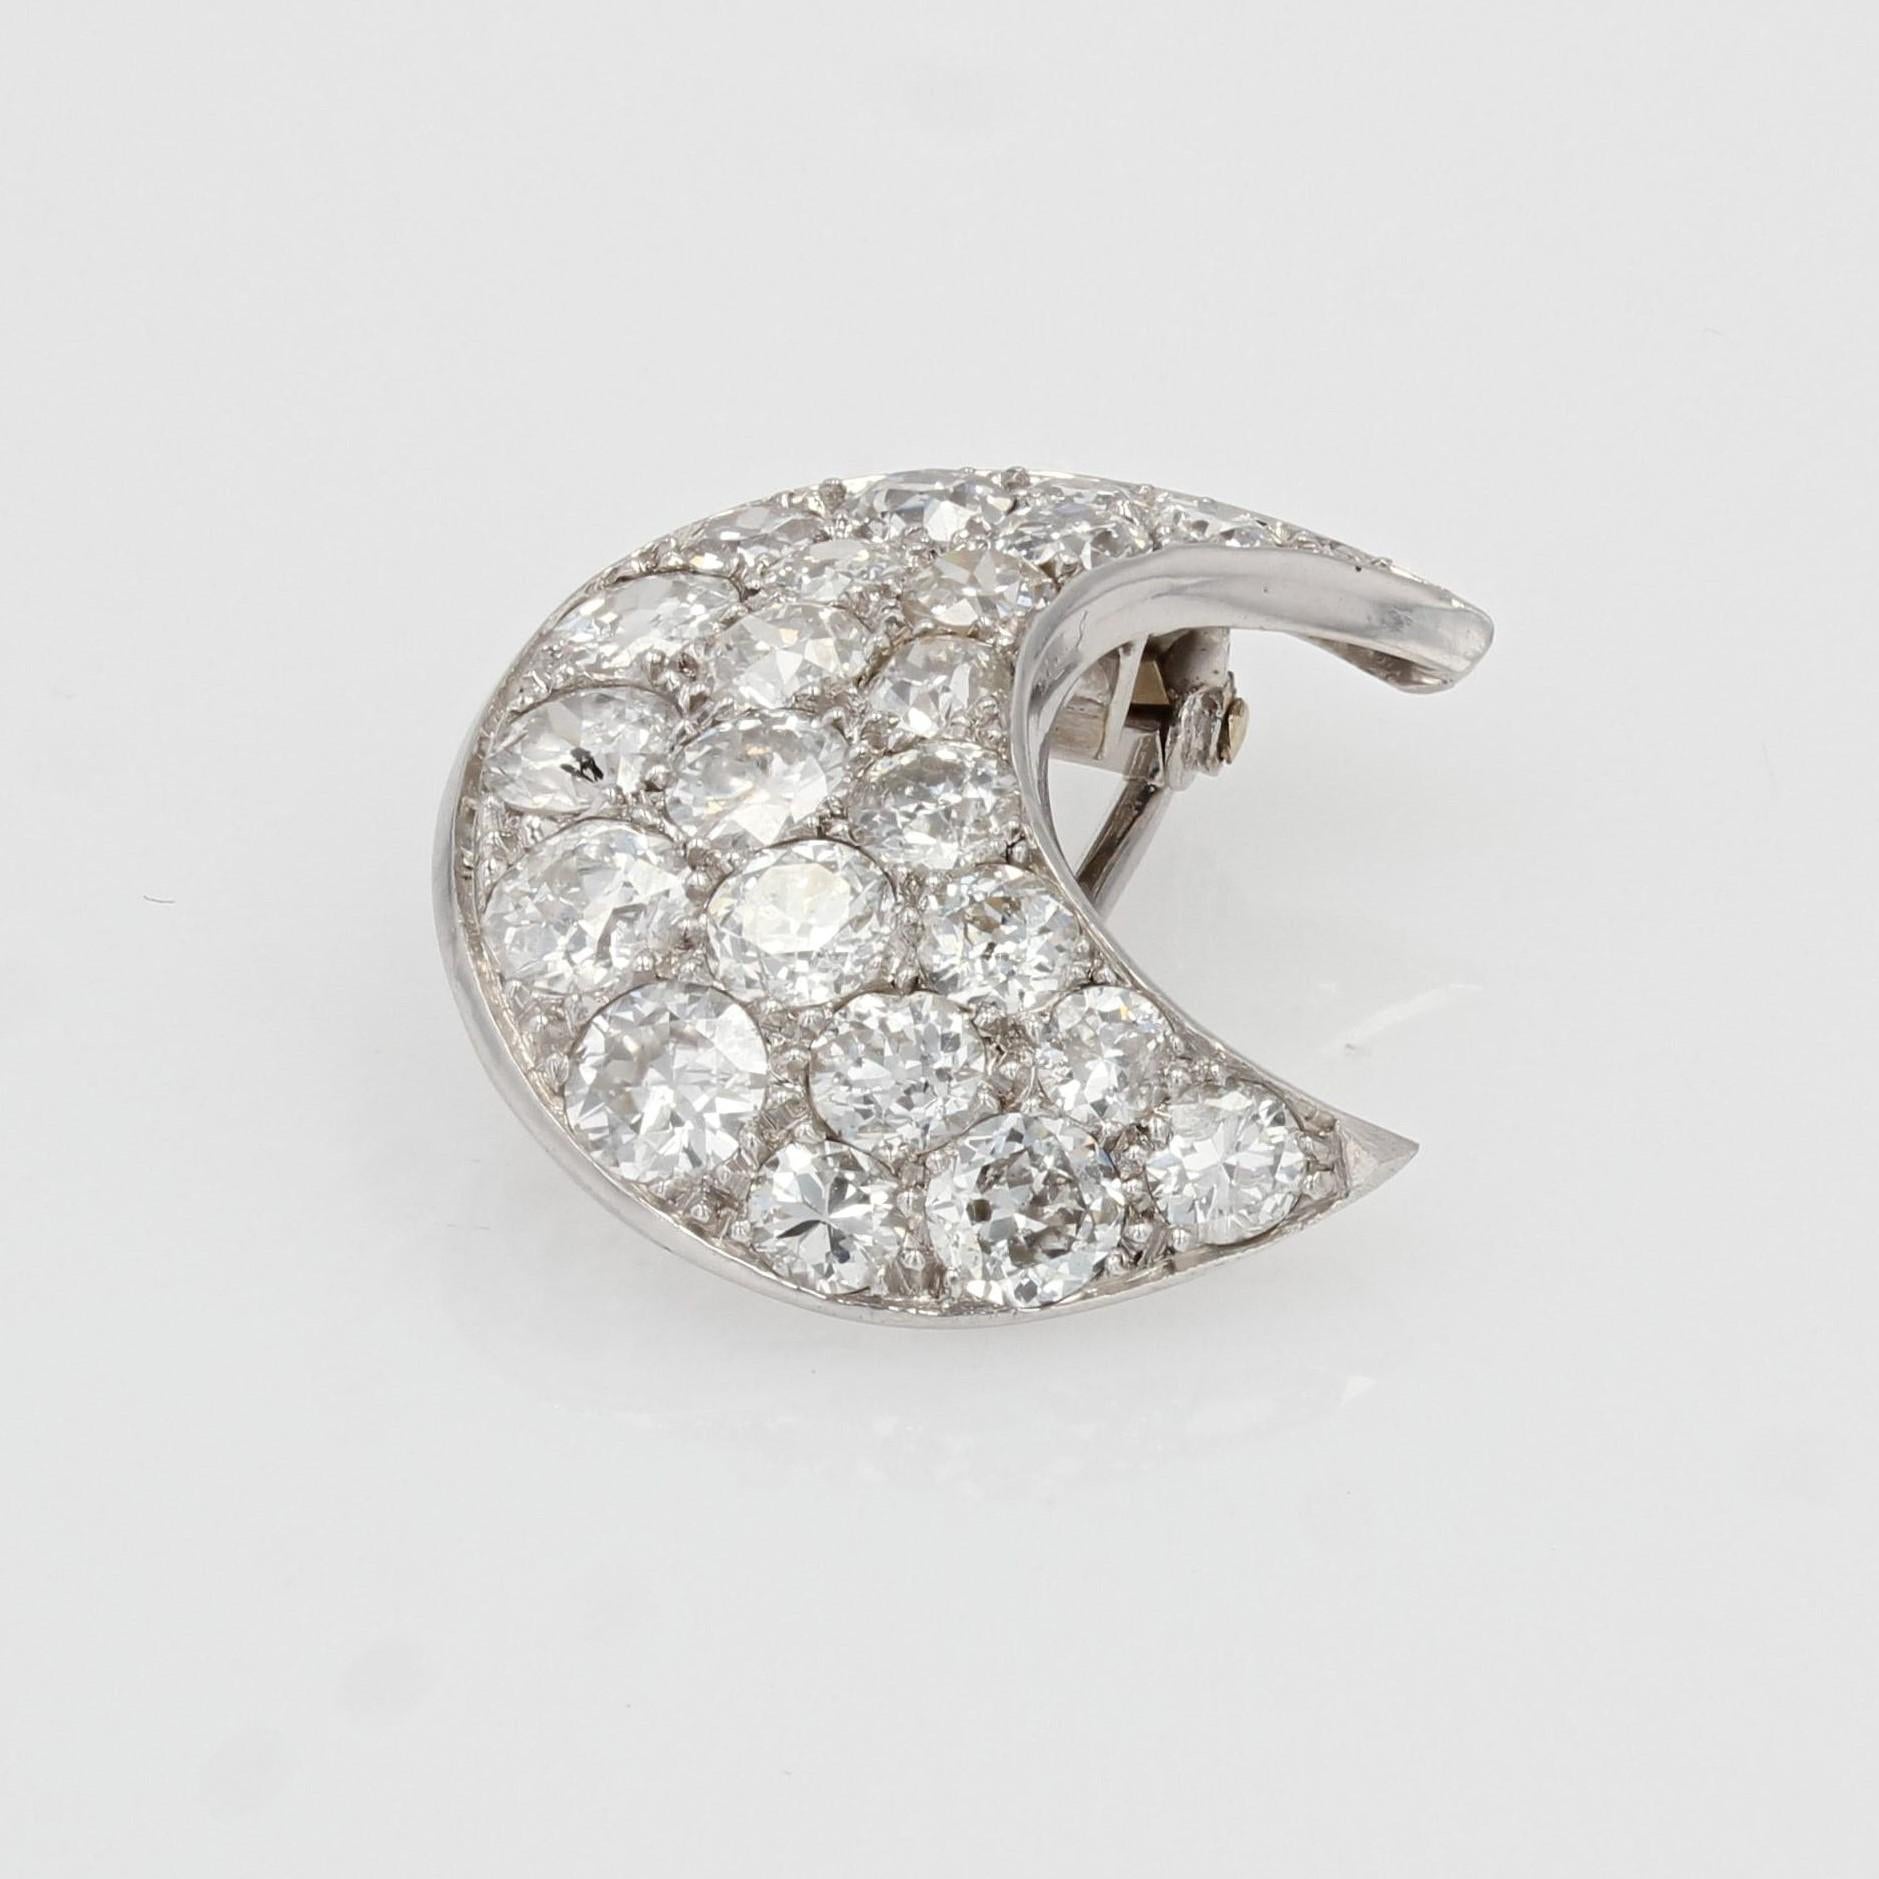 Brooch in 18 karat white gold, owl hallmark and platinum, mascaron hallmark.
Charming antique brooch, it represents a slightly curved crescent moon set with 23 brilliant-cut diamonds. The attachment system is a double pin.
Total weight of diamonds :